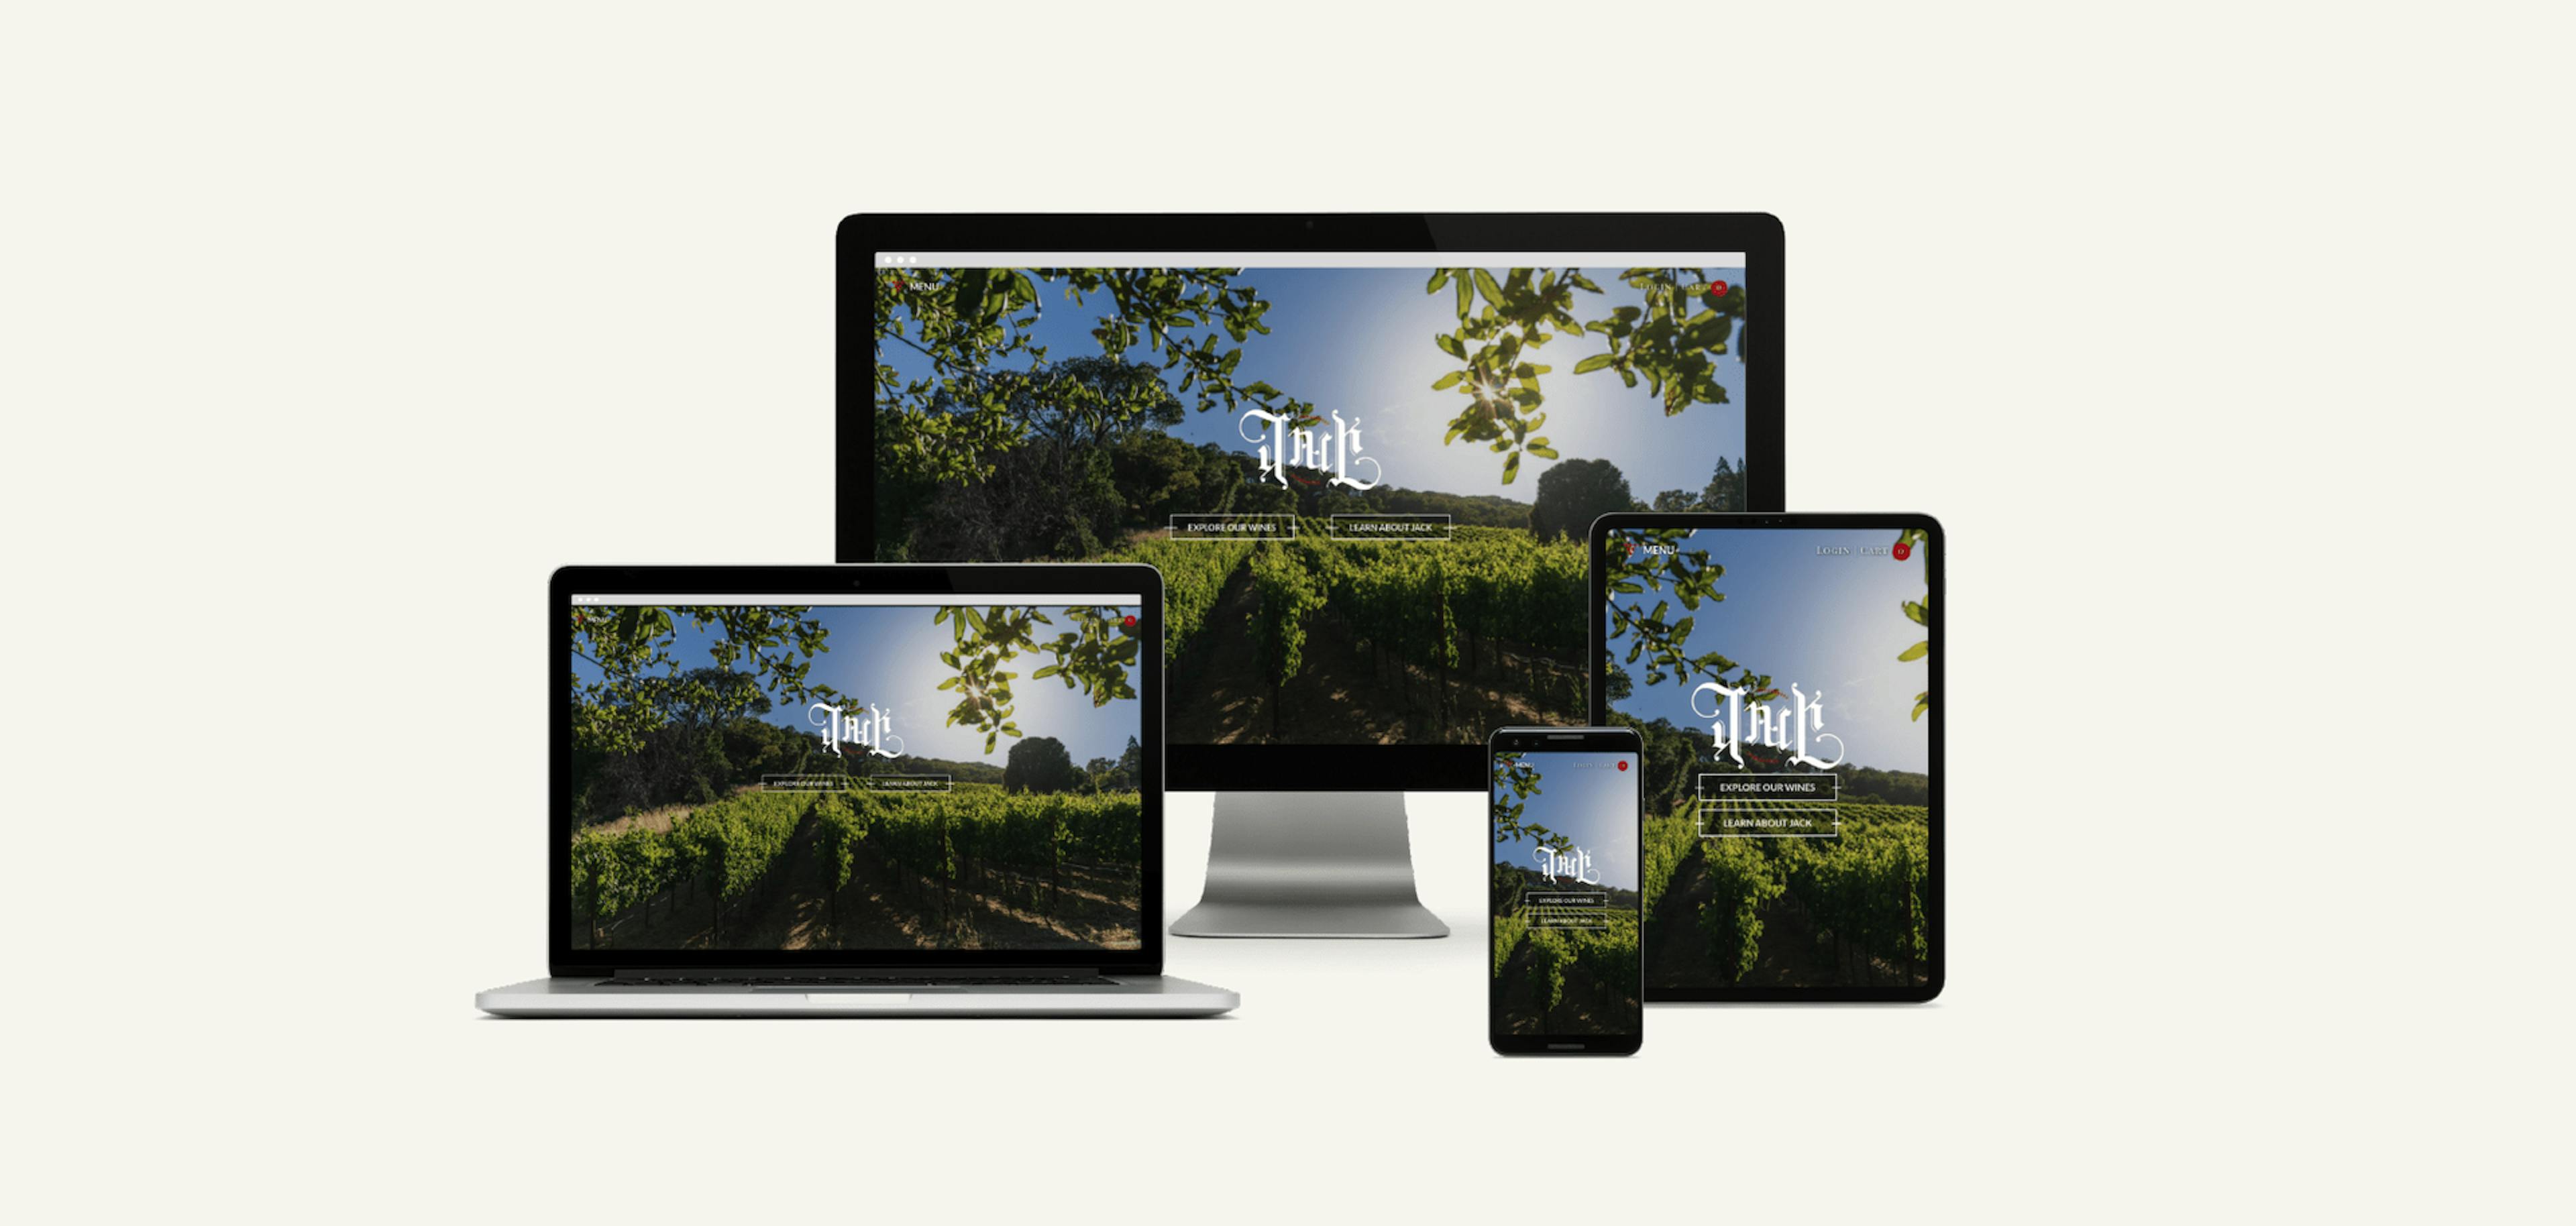 Website mockups for a winery shown on desktop, laptop, ipad, and mobile